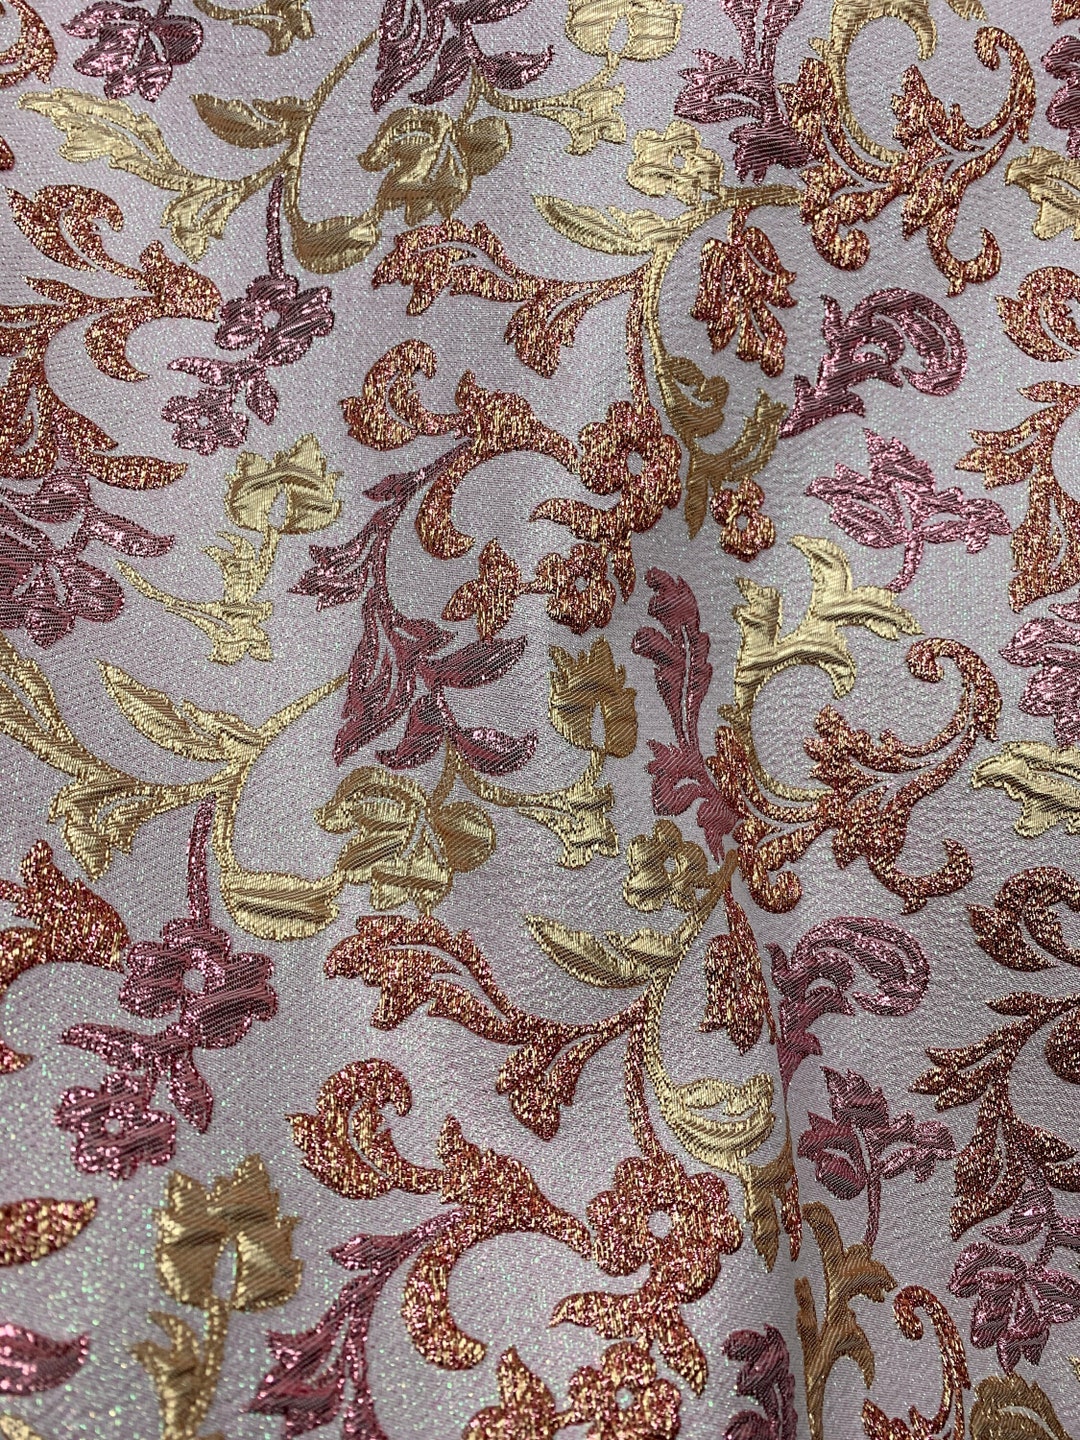 PINK GOLD Floral Brocade Fabric 60 In. Sold by the Yard - Etsy